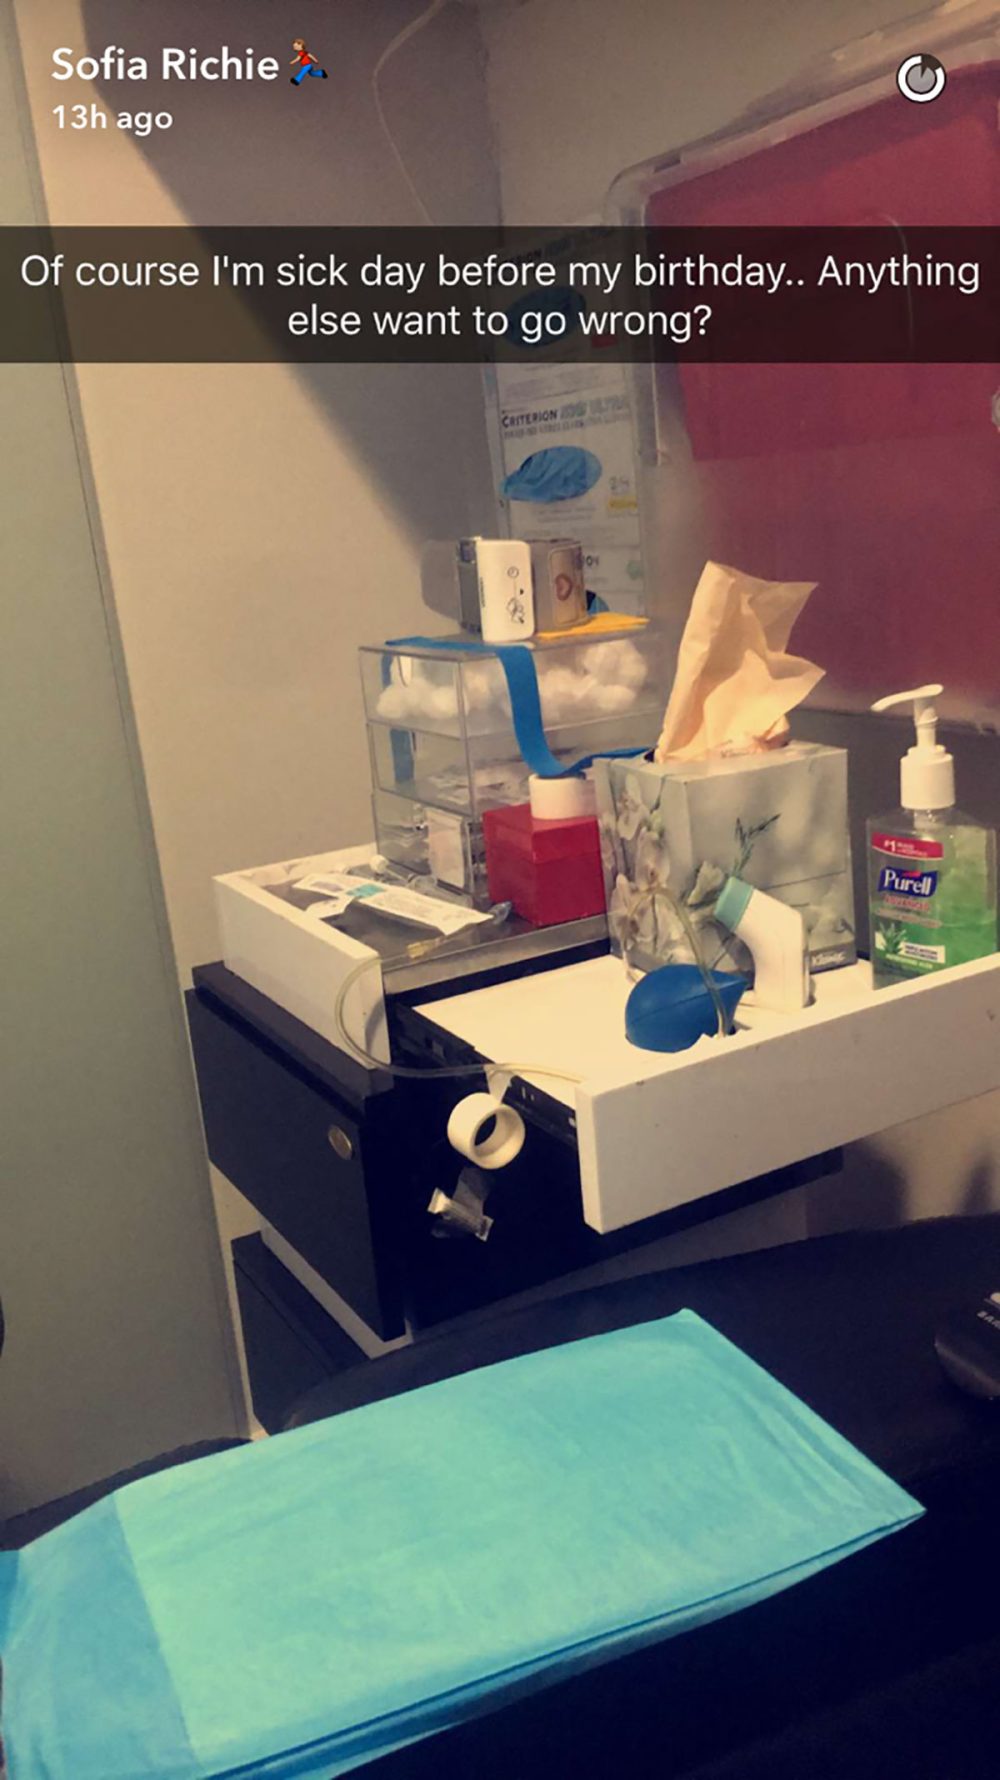 Sofia Richie posts photo inside doctor's office on the evening before her birthday